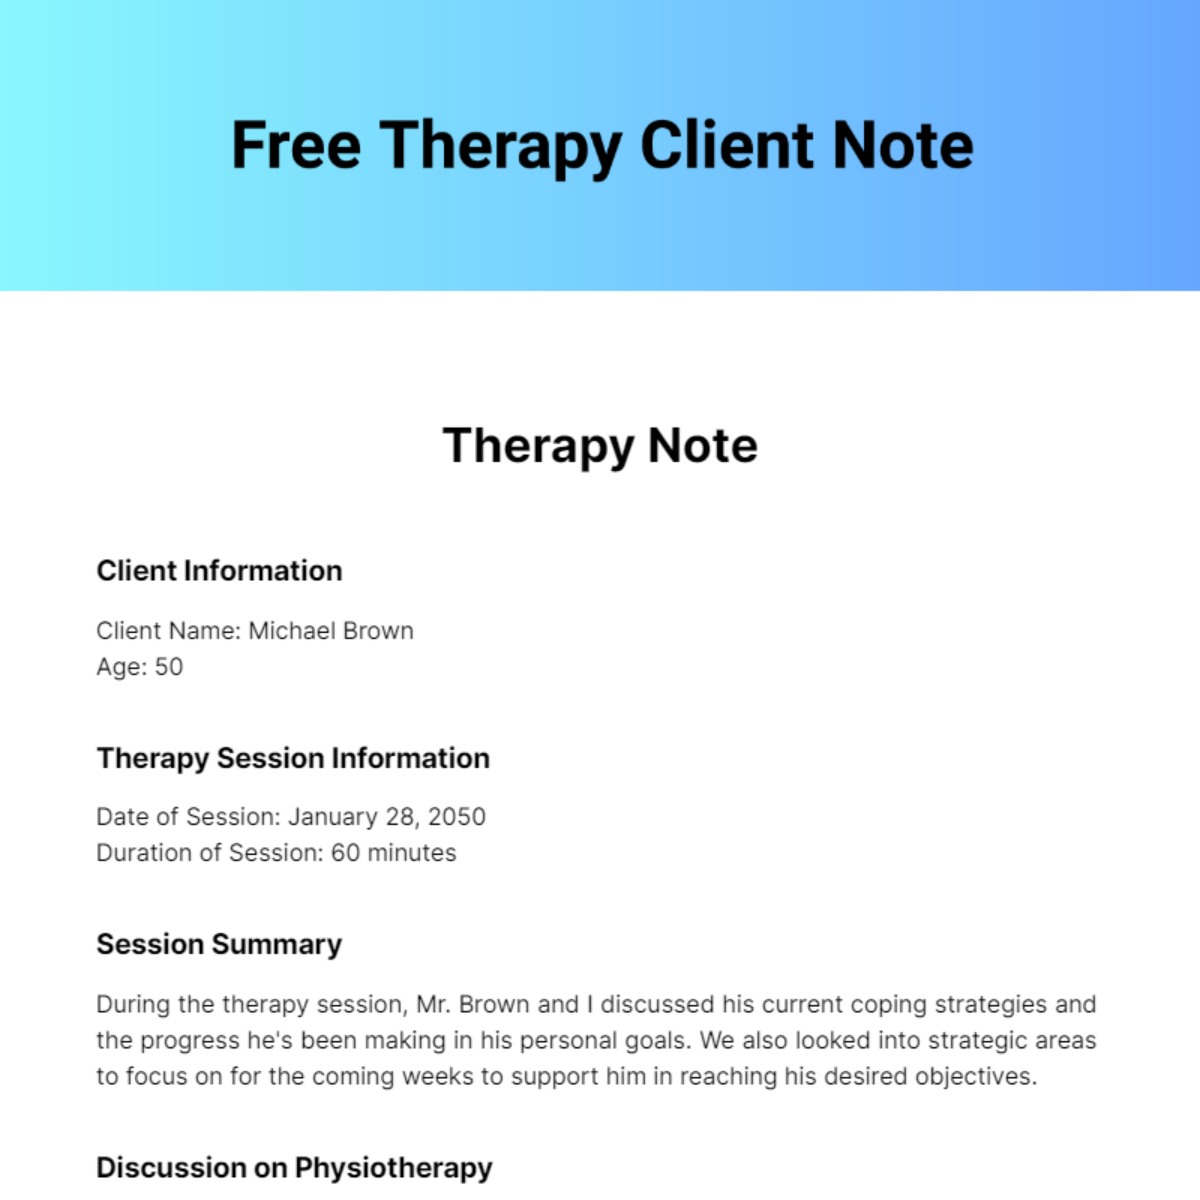 Free Therapy Client Note Template